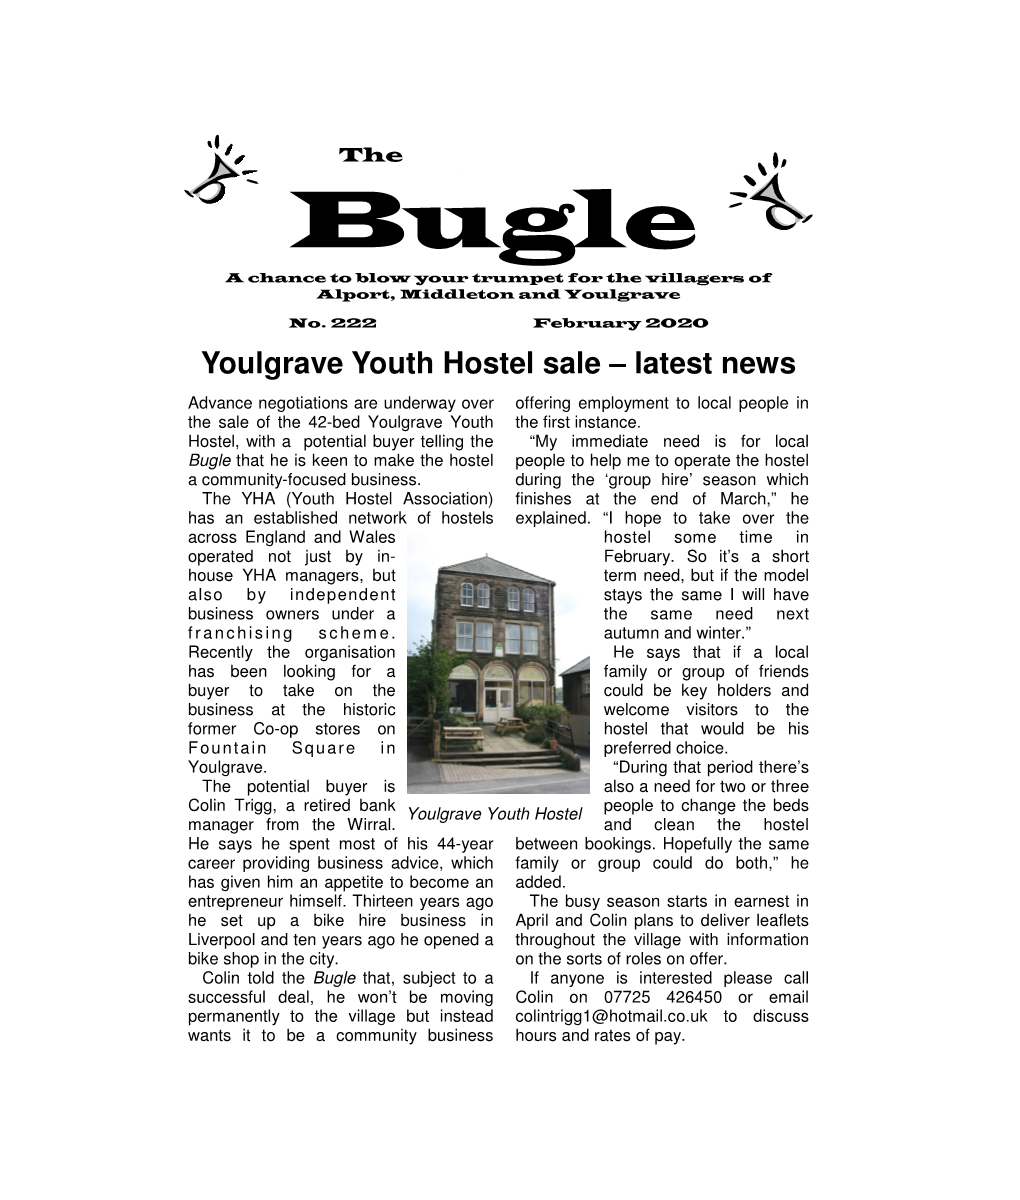 Youlgrave Youth Hostel Sale – Latest News